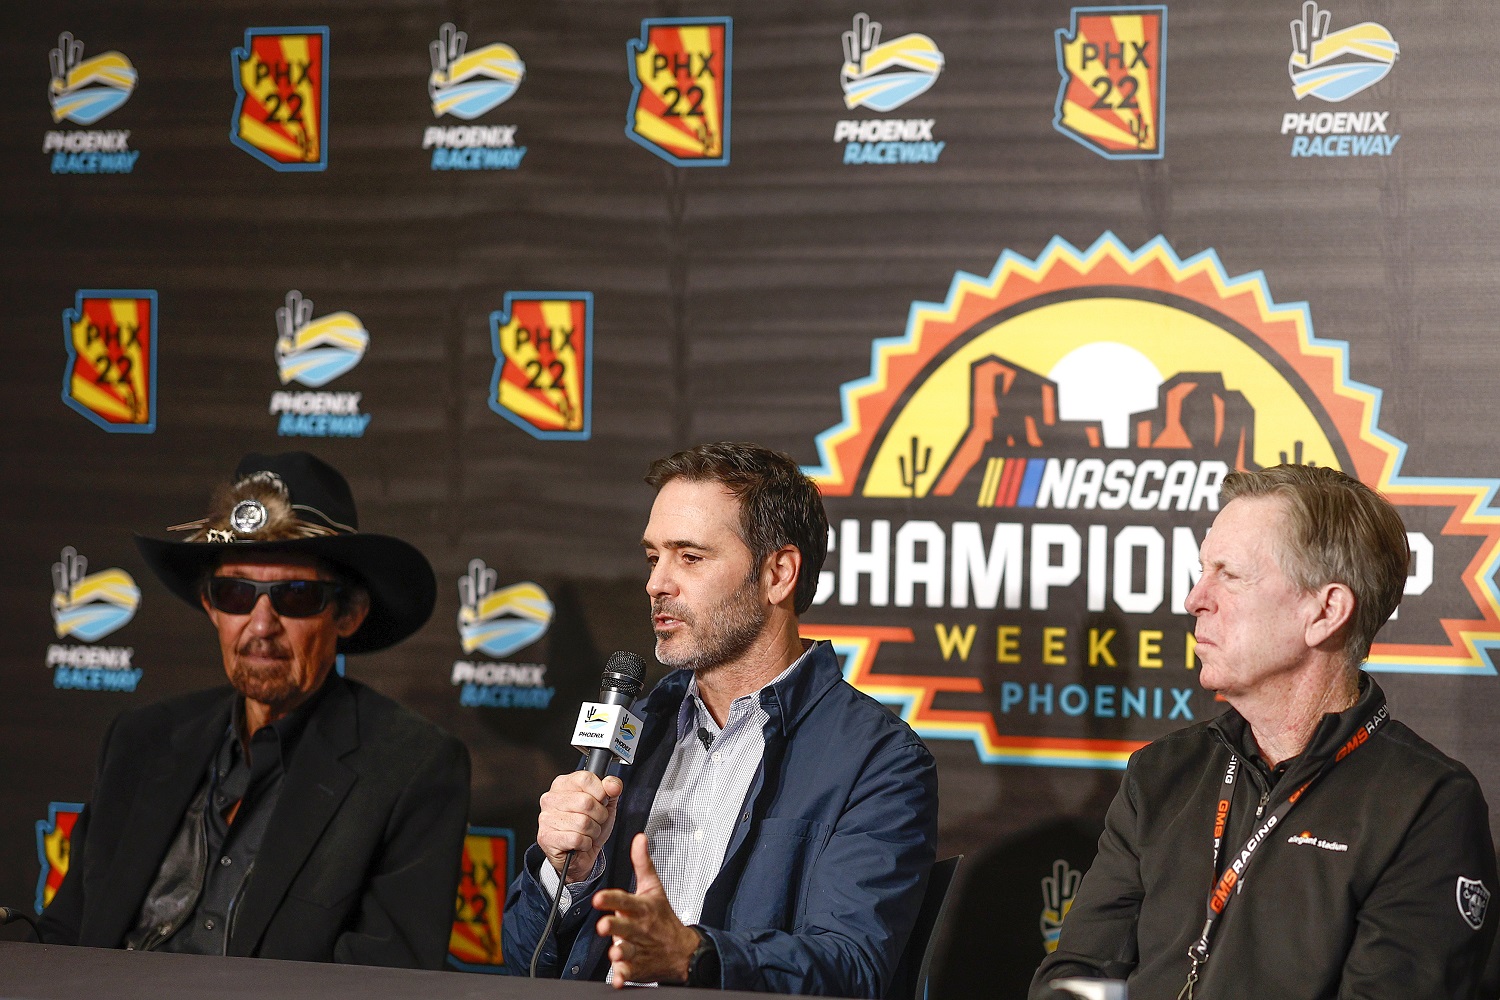 Jimmie Johnson, center, speaks to the media announcing he has taken an ownership stake in Petty GMS Motorsports as team owners Richard Petty, left, and Maury Gallagher look on.